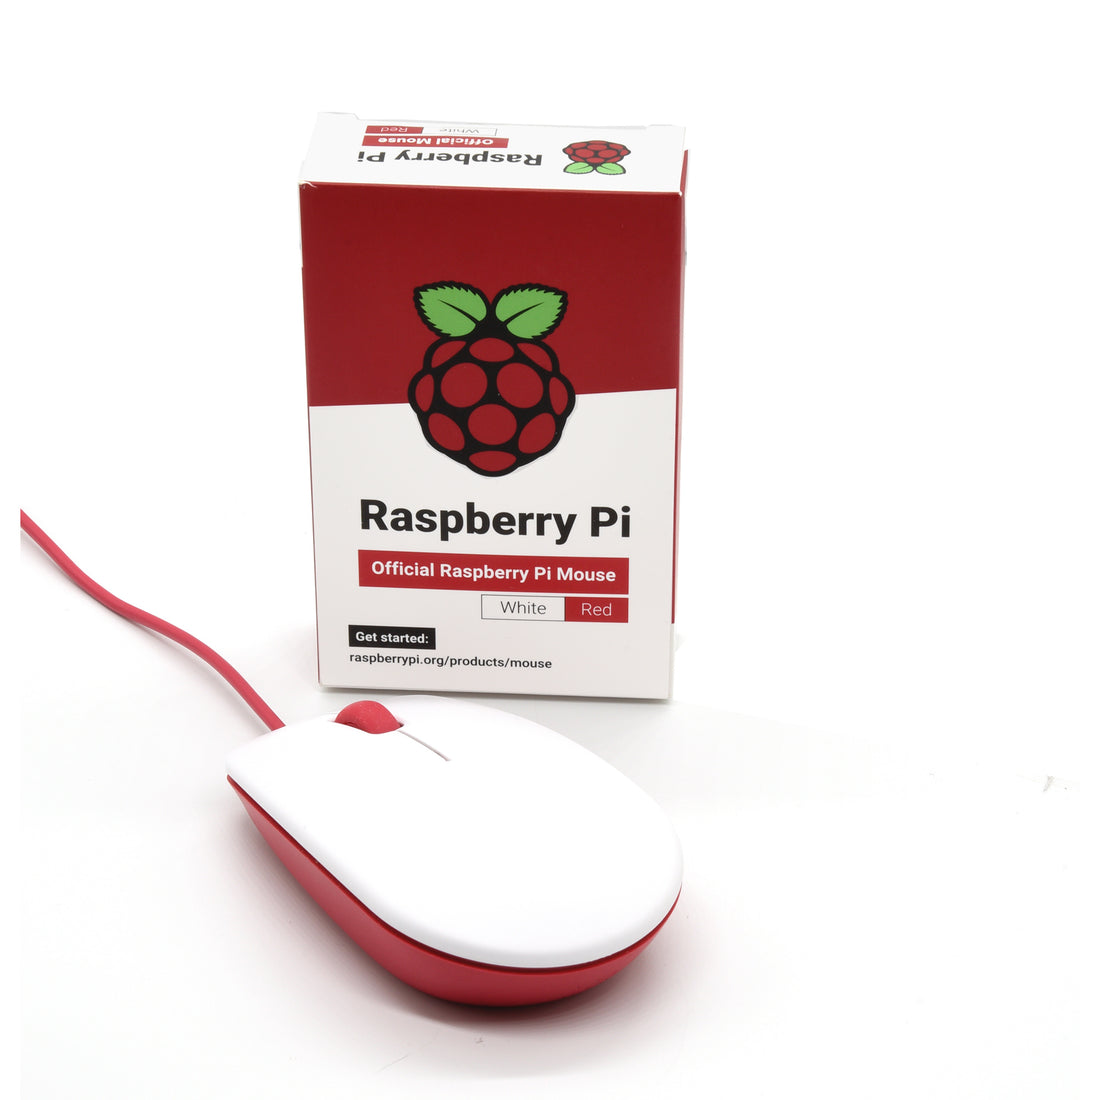 PepperTech Digital Raspberry Pi 400 Computer and Mouse Value Pack (U.S. Layout - Red/White)